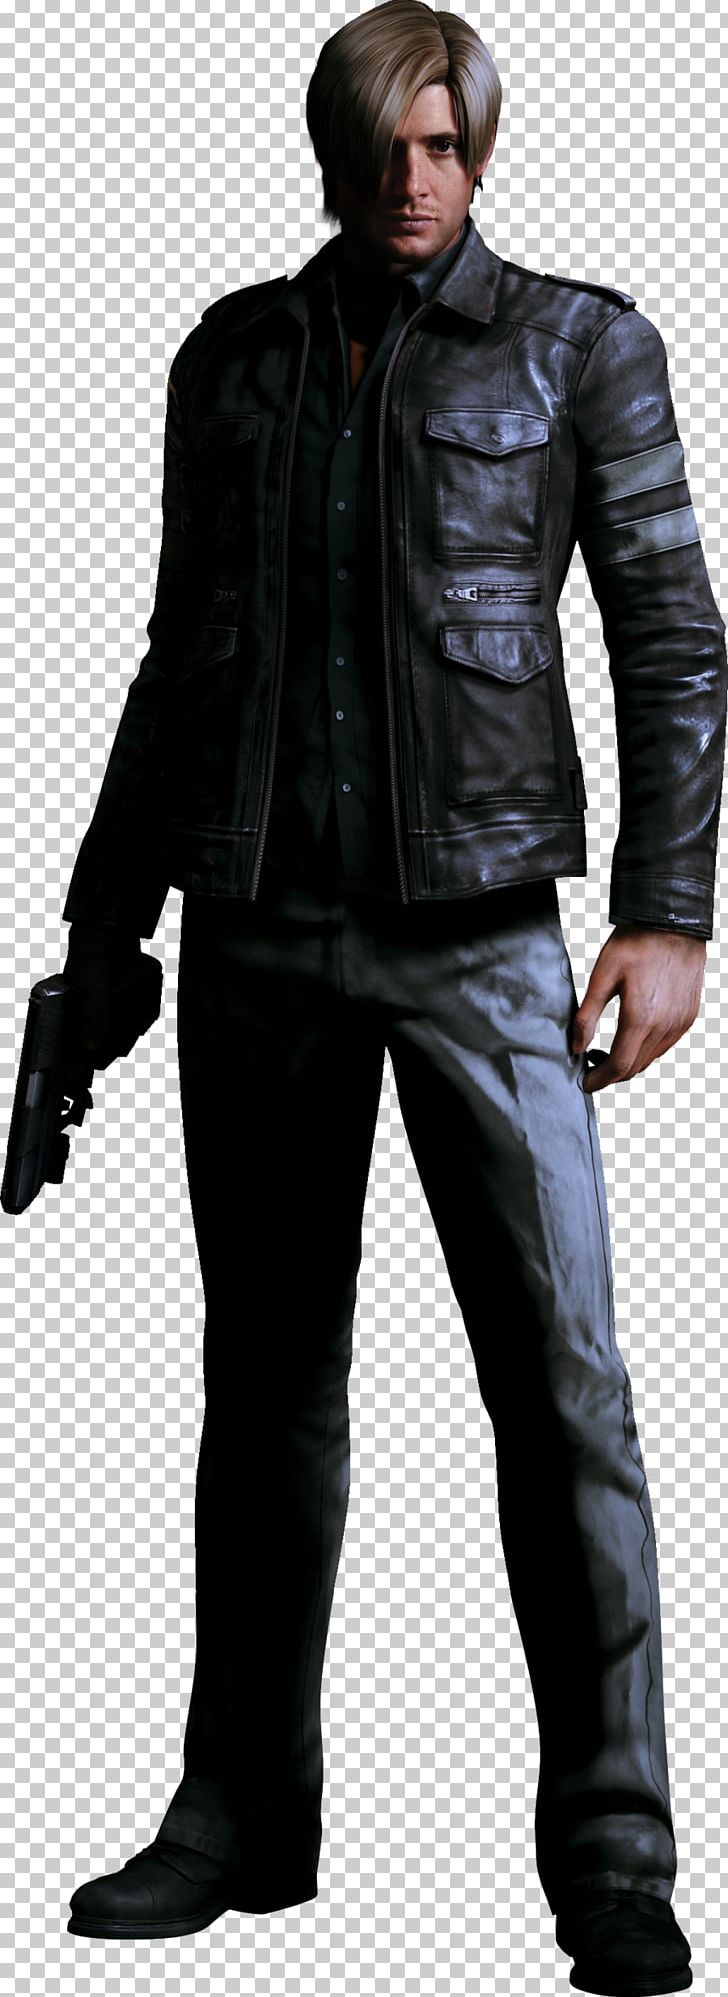 Resident Evil 6 Resident Evil 4 Resident Evil 2 Leon S. Kennedy Chris Redfield PNG, Clipart, Ada Wong, Albert Wesker, Claire Redfield, Costume, Helena Harper Free PNG Download